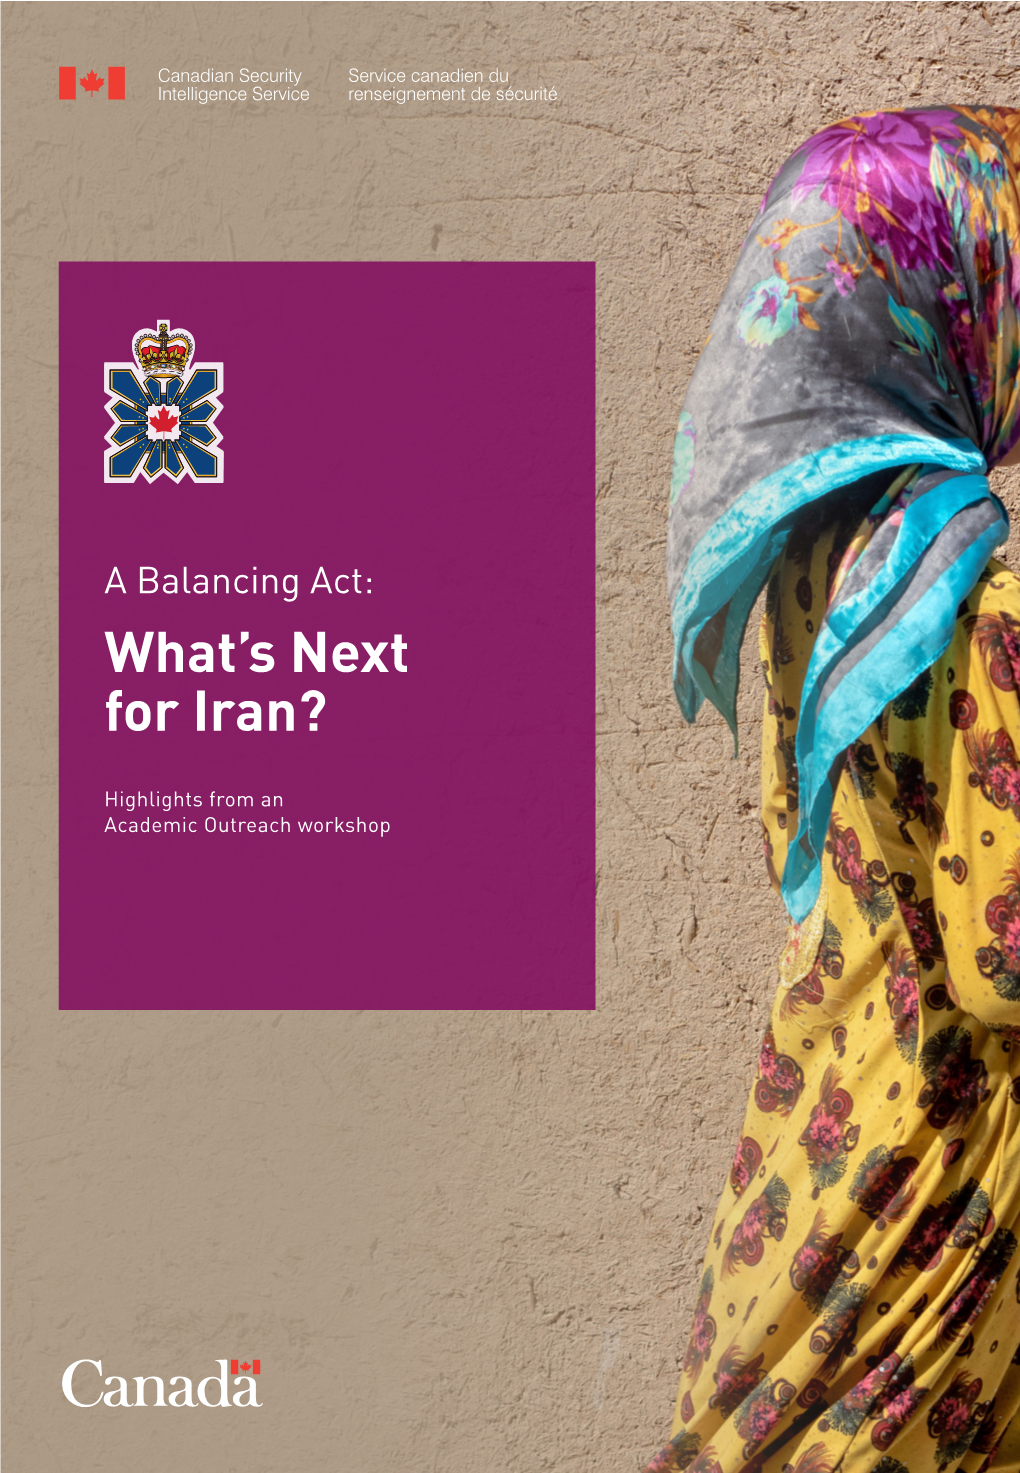 What's Next for Iran?